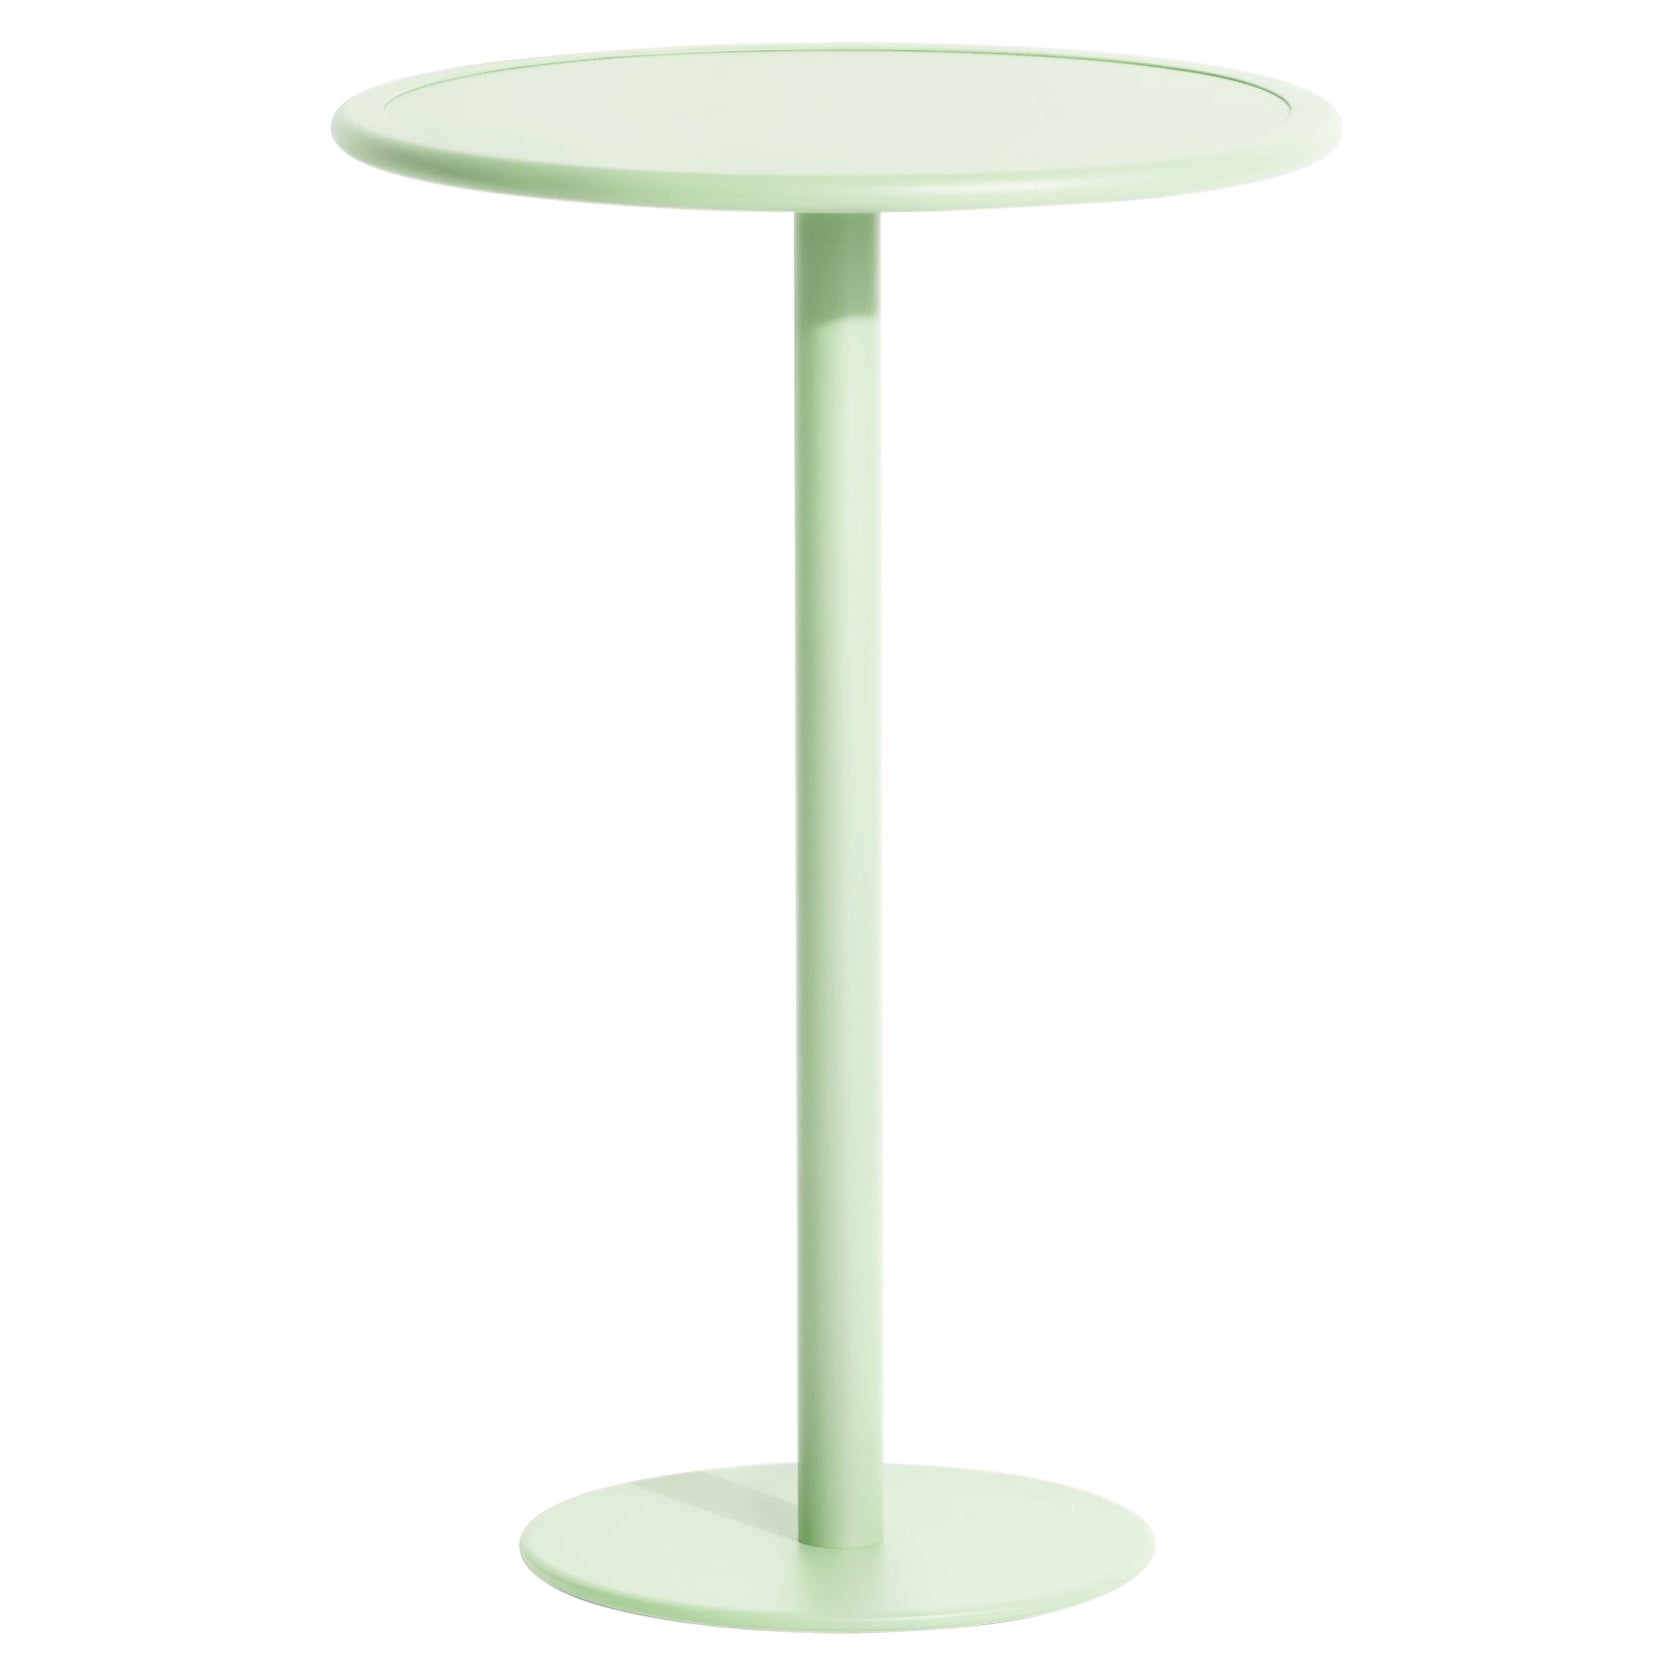 Petite Friture Week-End Round High Table in Pastel Green Aluminium, 2017 For Sale